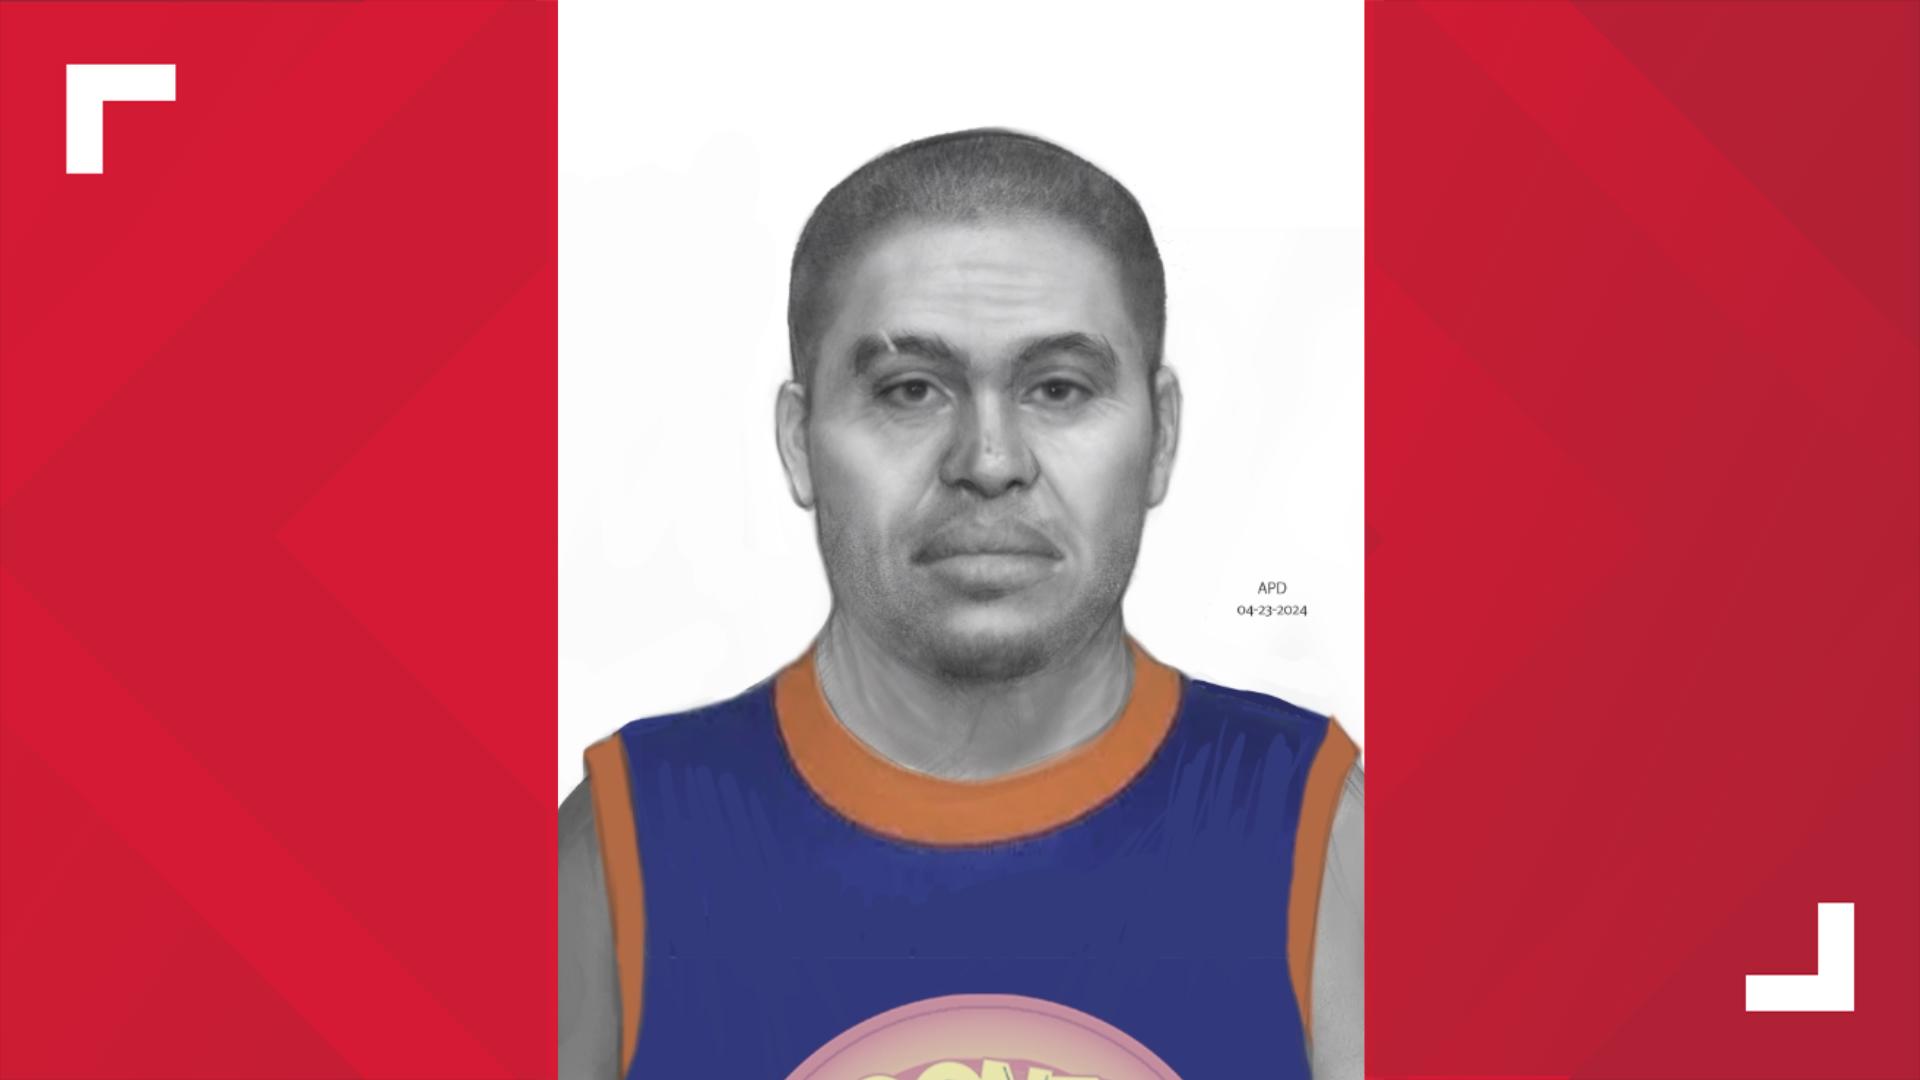 Police are asking for the public's help locating a man accused of child trafficking in northeast Austin.